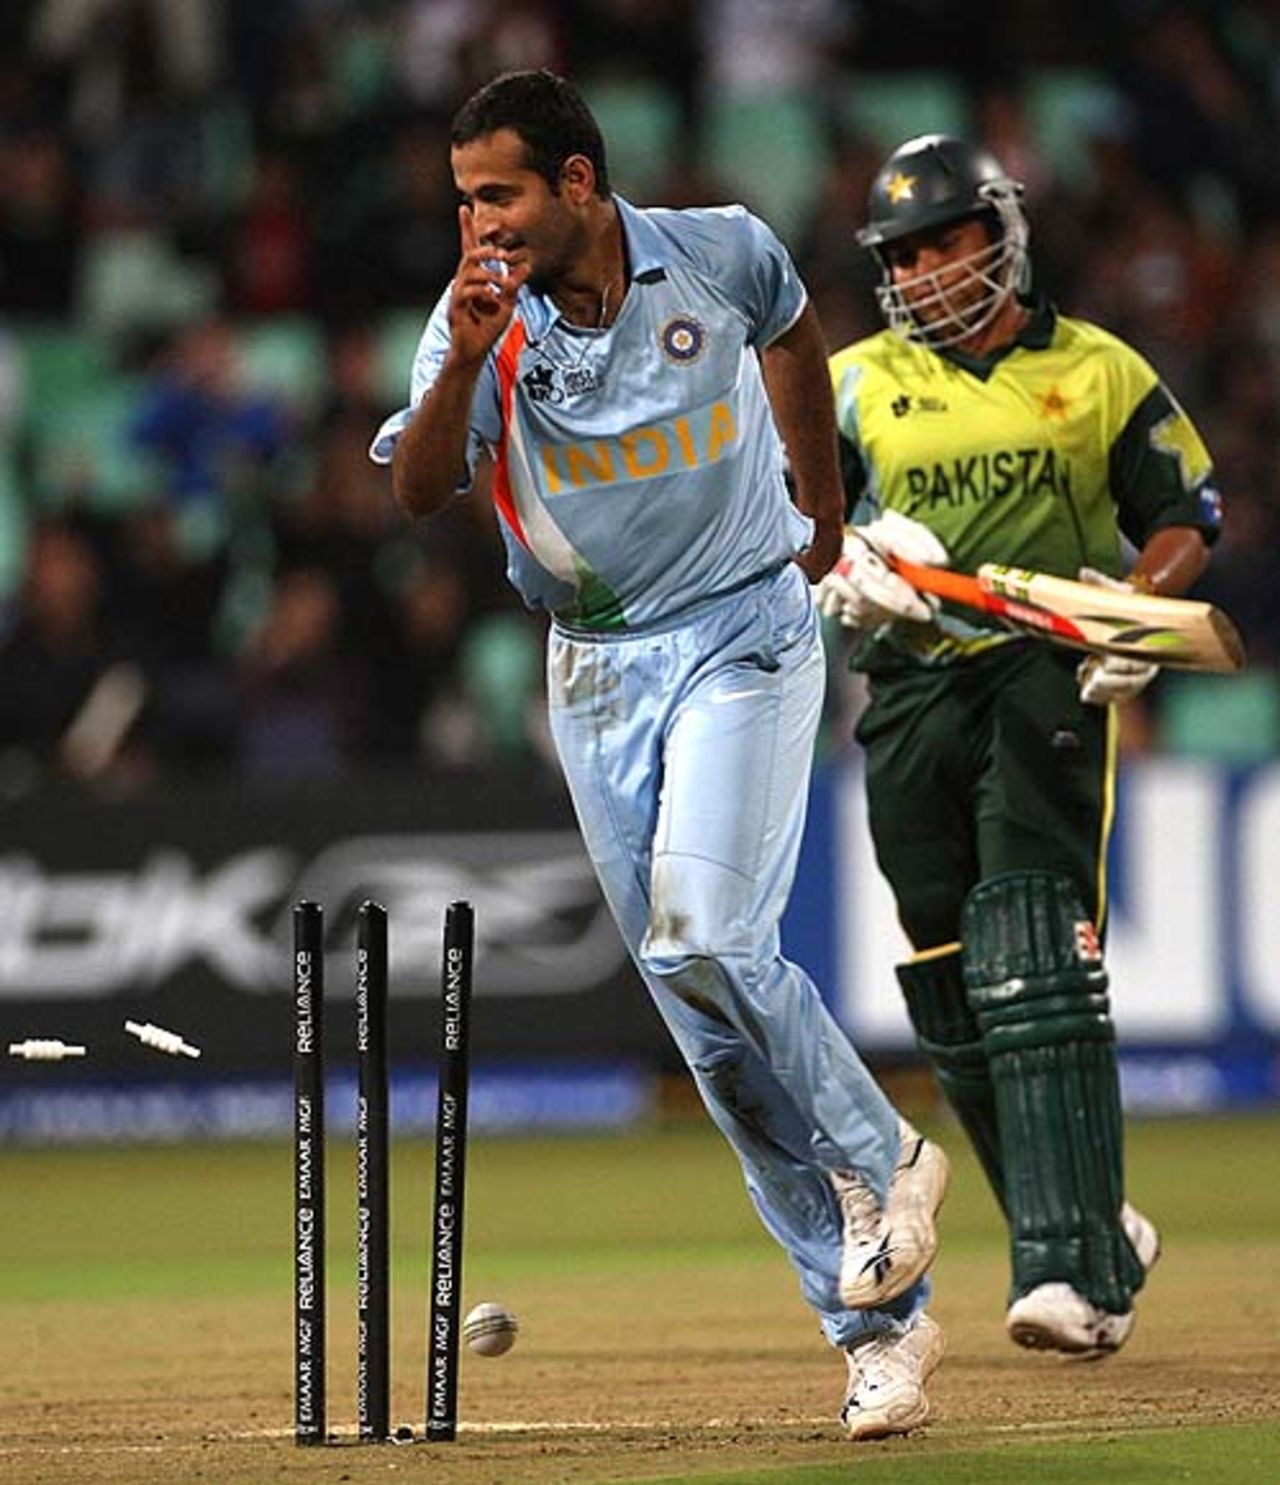 Irfan Pathan rejoices after Kamran Akmal is run-out by a direct throw from Yuvraj Singh, India v Pakistan, Group D, ICC World Twenty20, Durban, September 14, 2007 